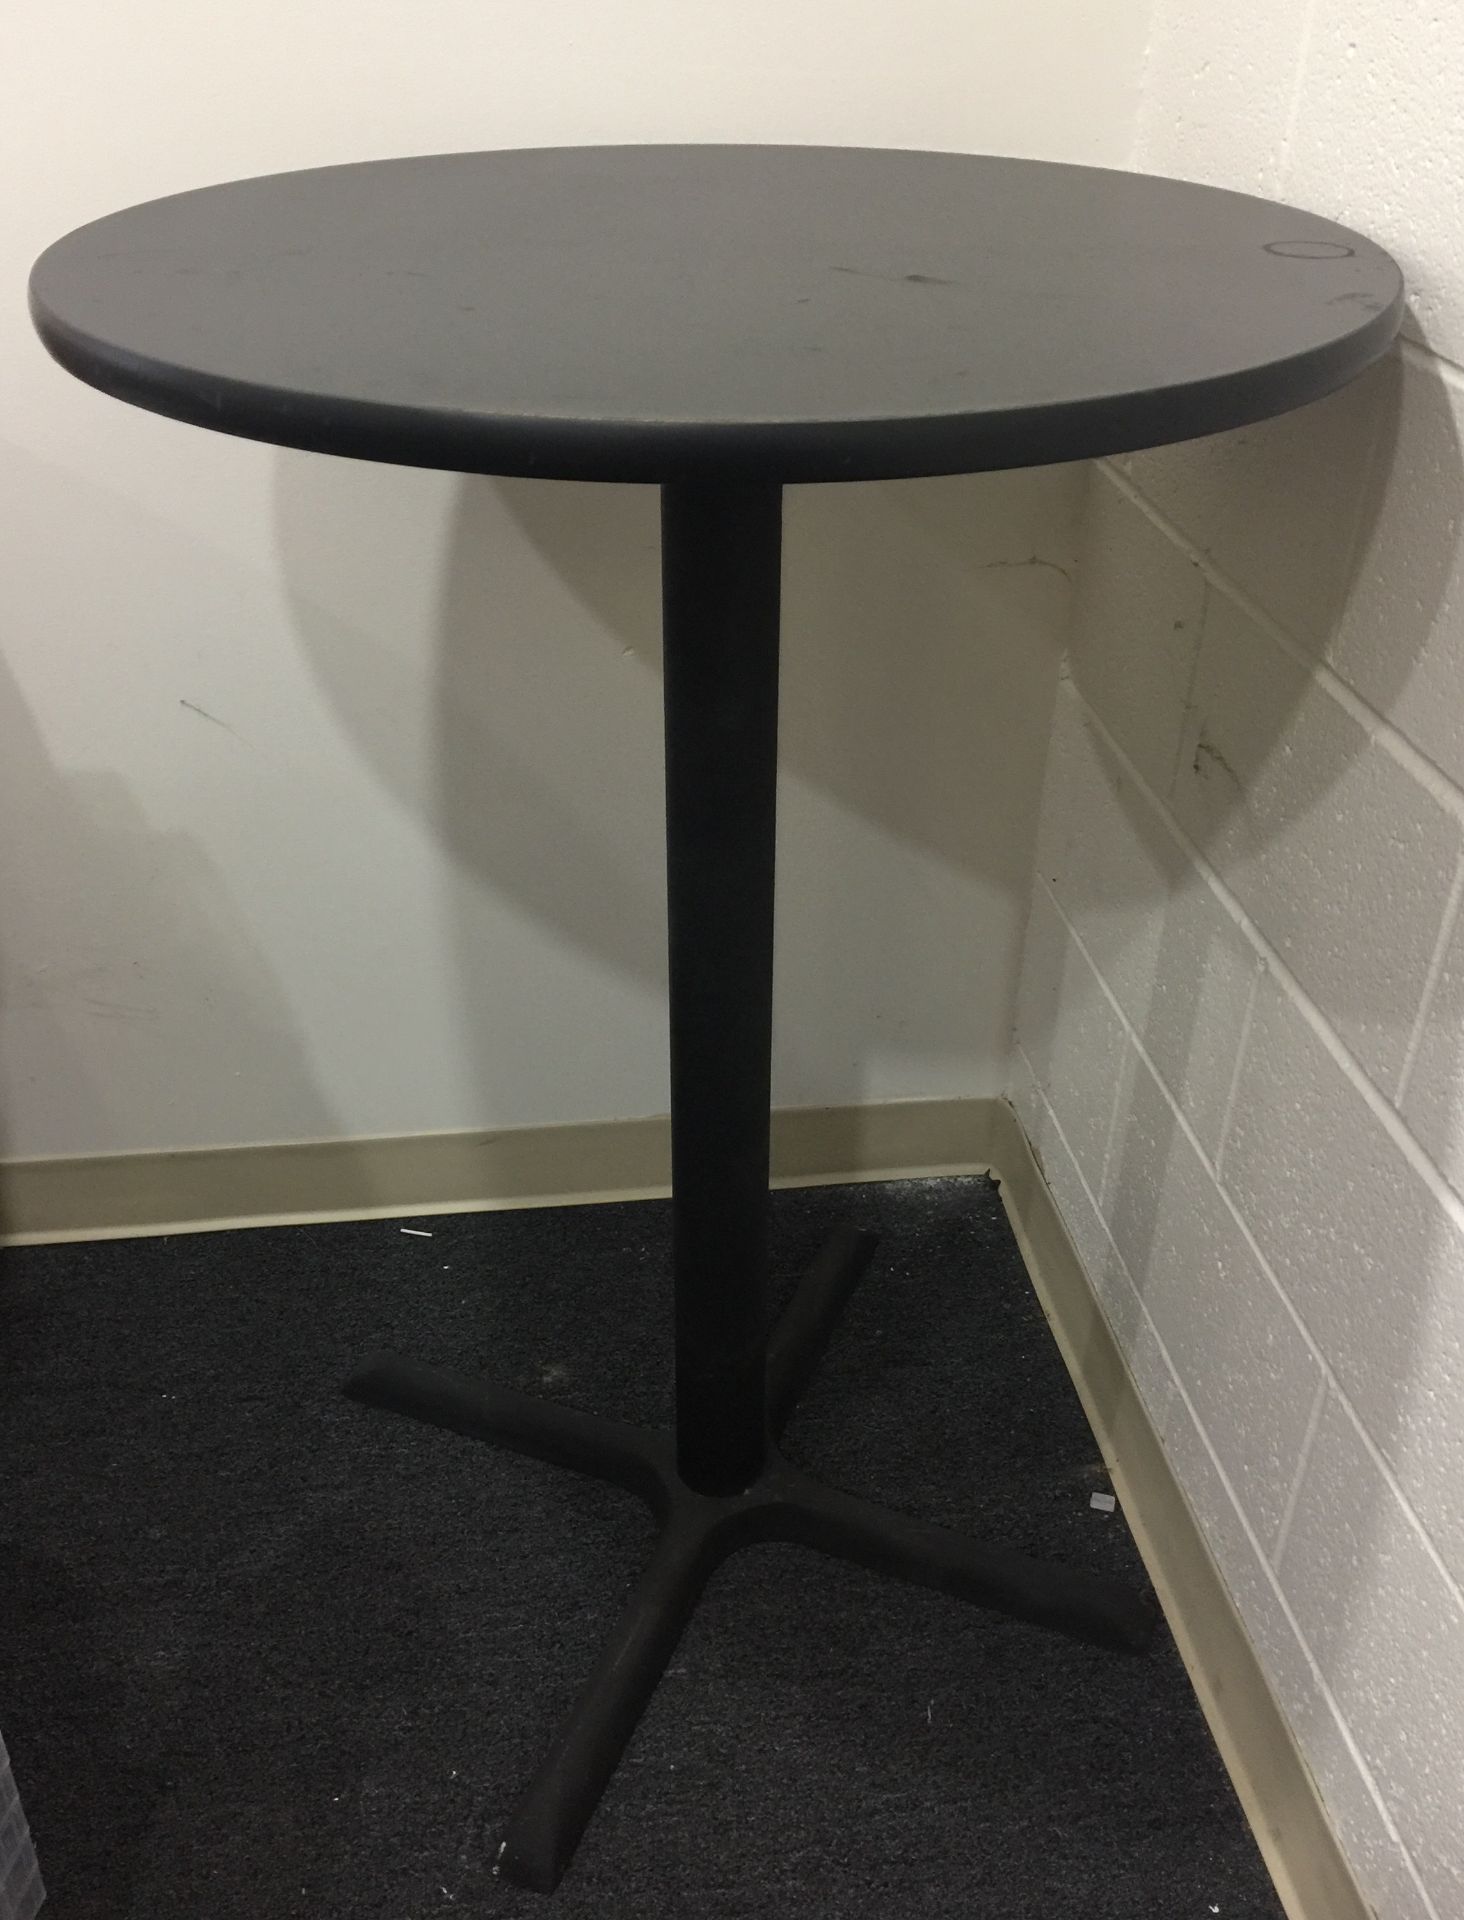 4 FT STANDING COFFEE / OFFICE TABLE BLACK ON BLACK